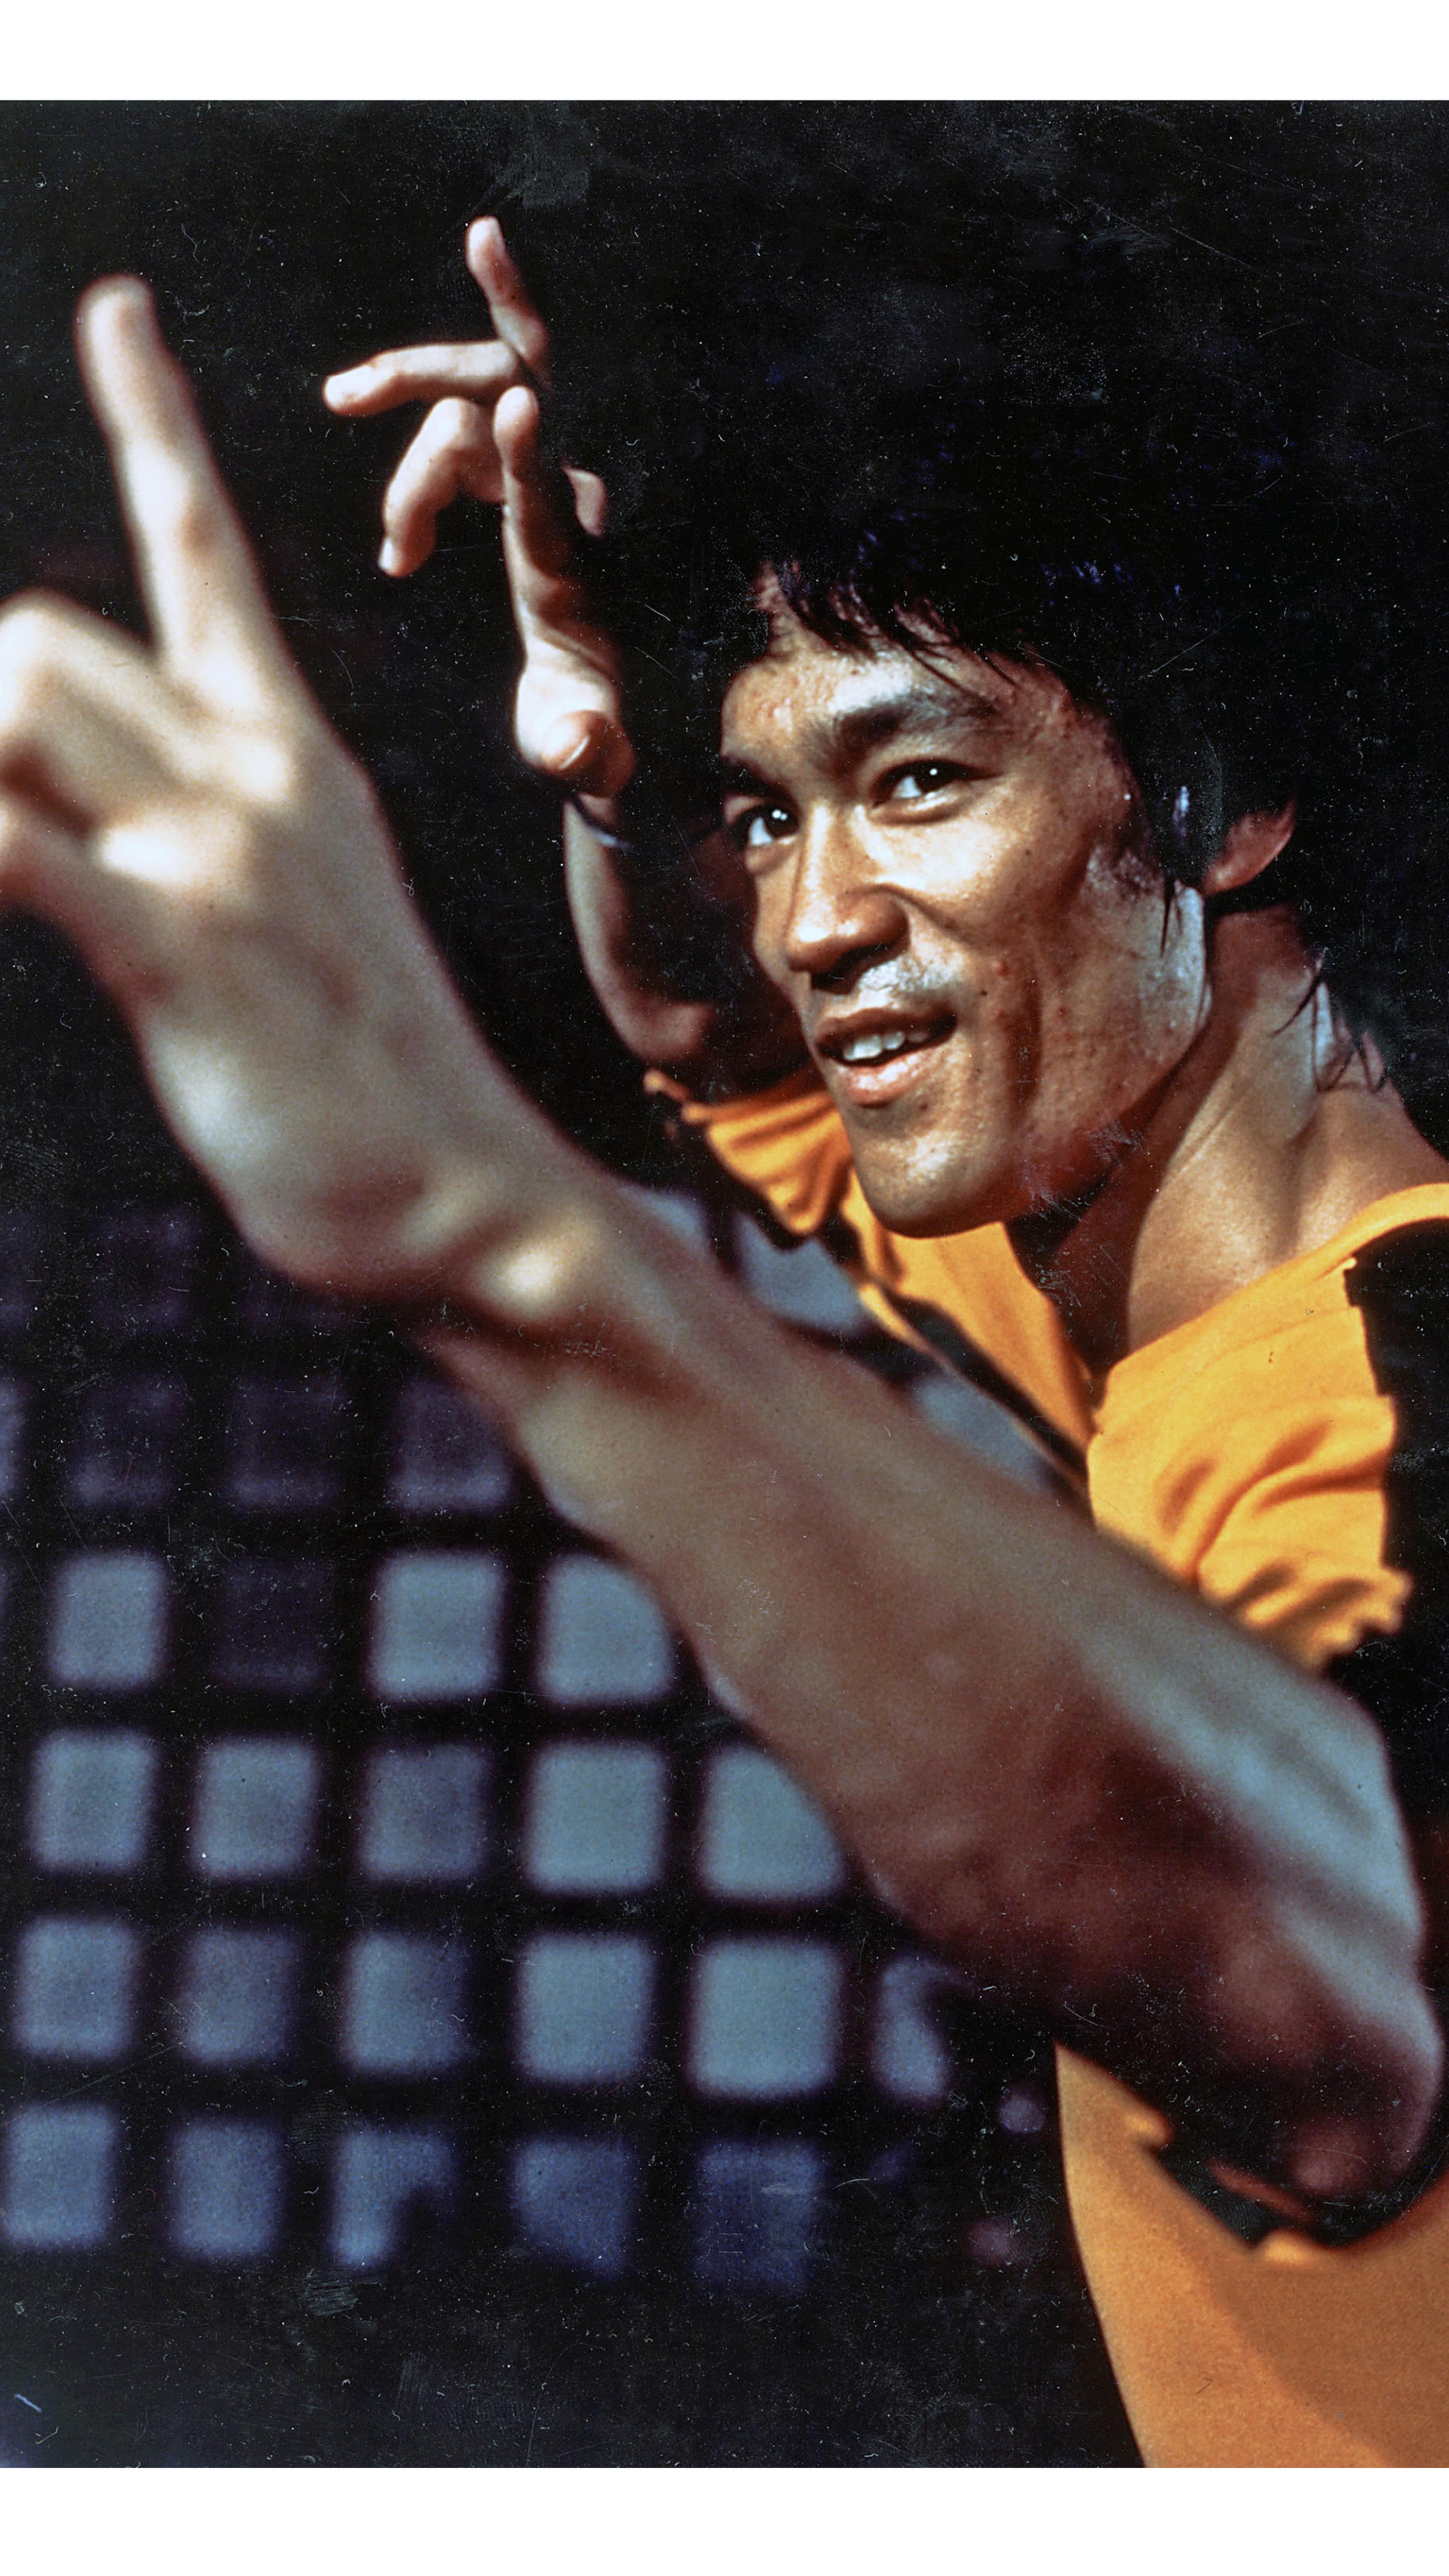 Preview image for the show titled "2024 Bruce Lee Keepsake 50th Anniversary Box Edition" at Today @ 8:00 PM